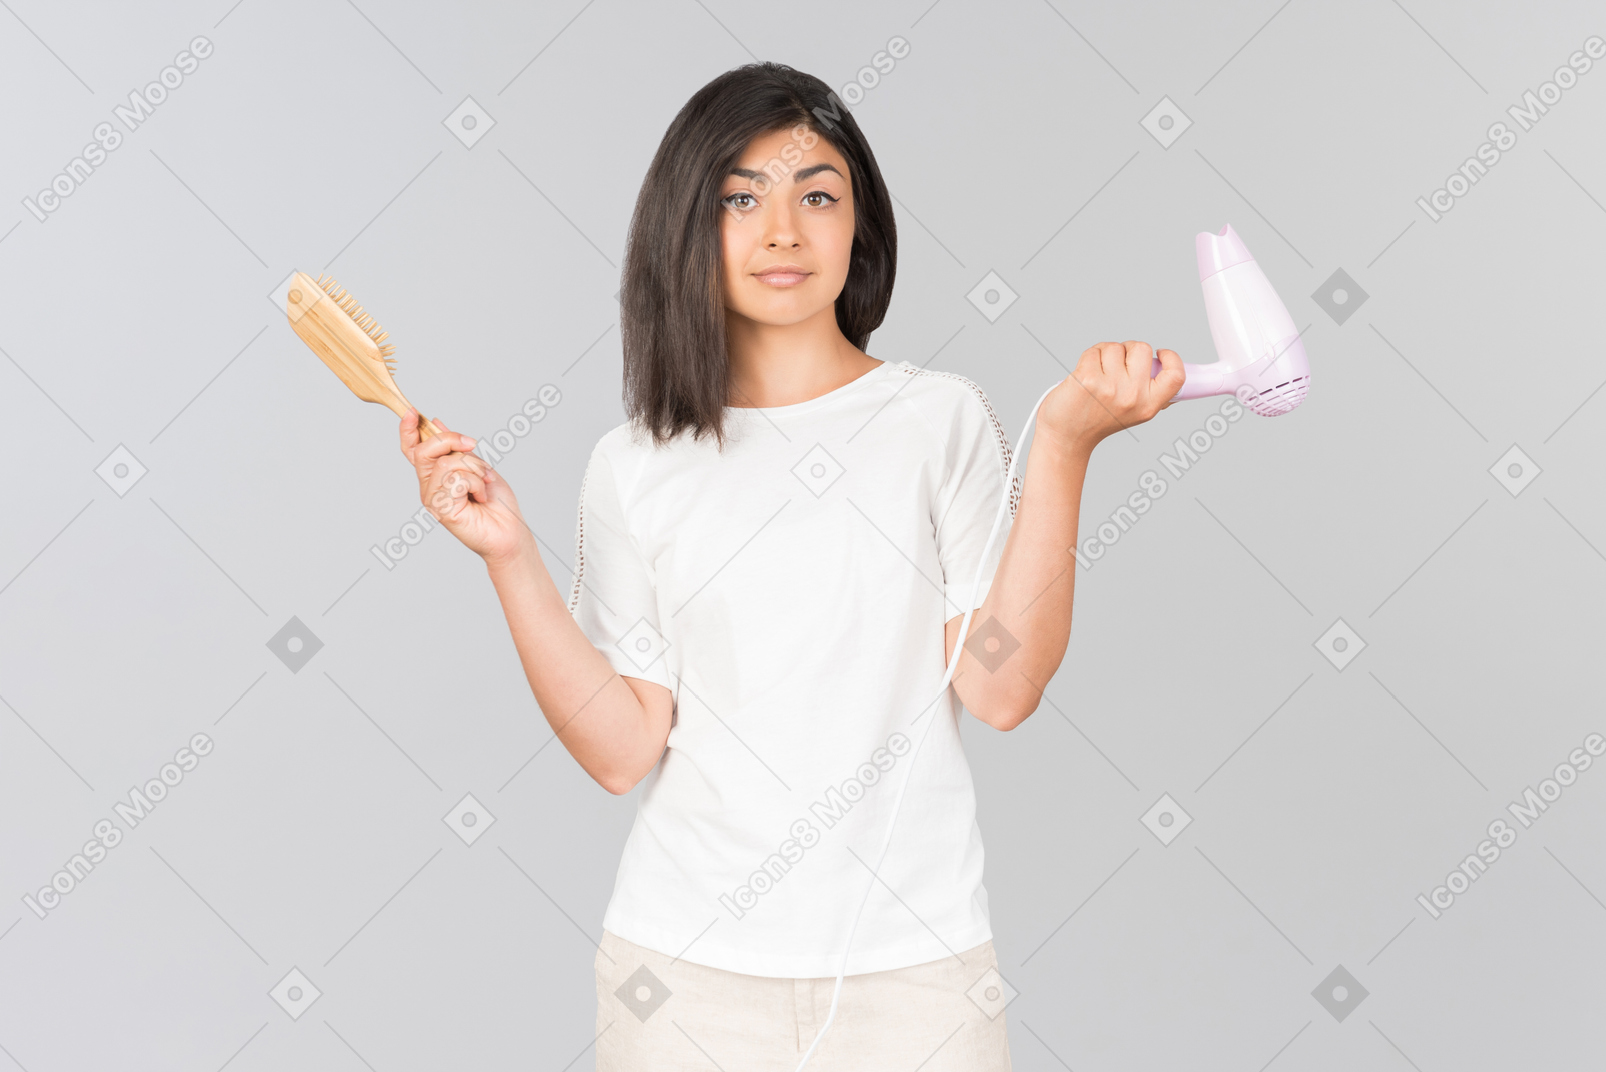 Young indian woman with messy hair holding hairbrush and dryer